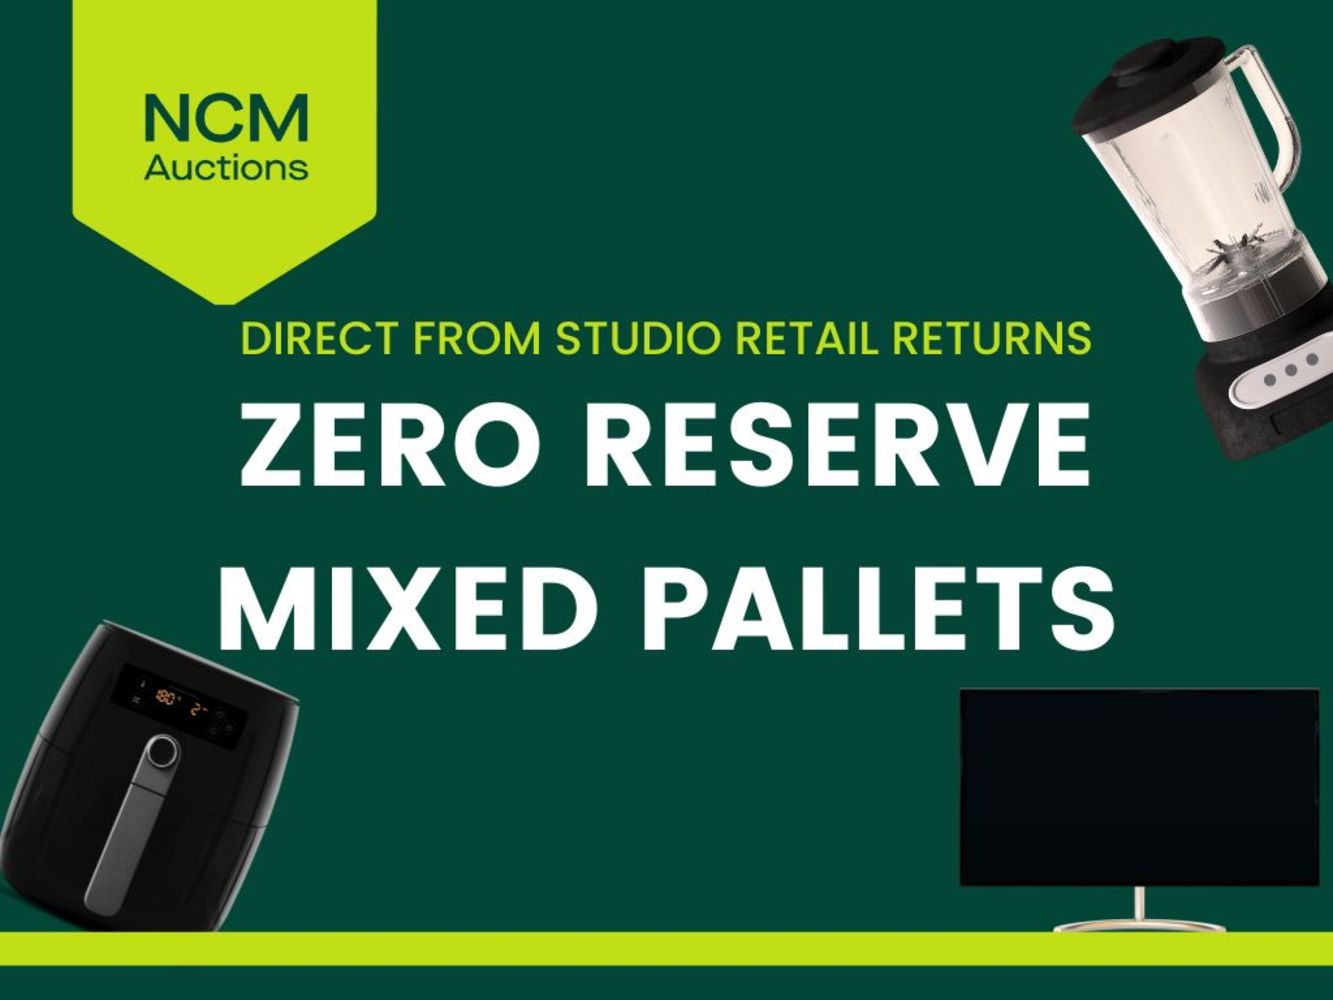 Trade Pallet Auction - Unchecked & Unwrapped Mixed pallets - ZERO RESERVE - All lots direct from Studio Retail Returns department